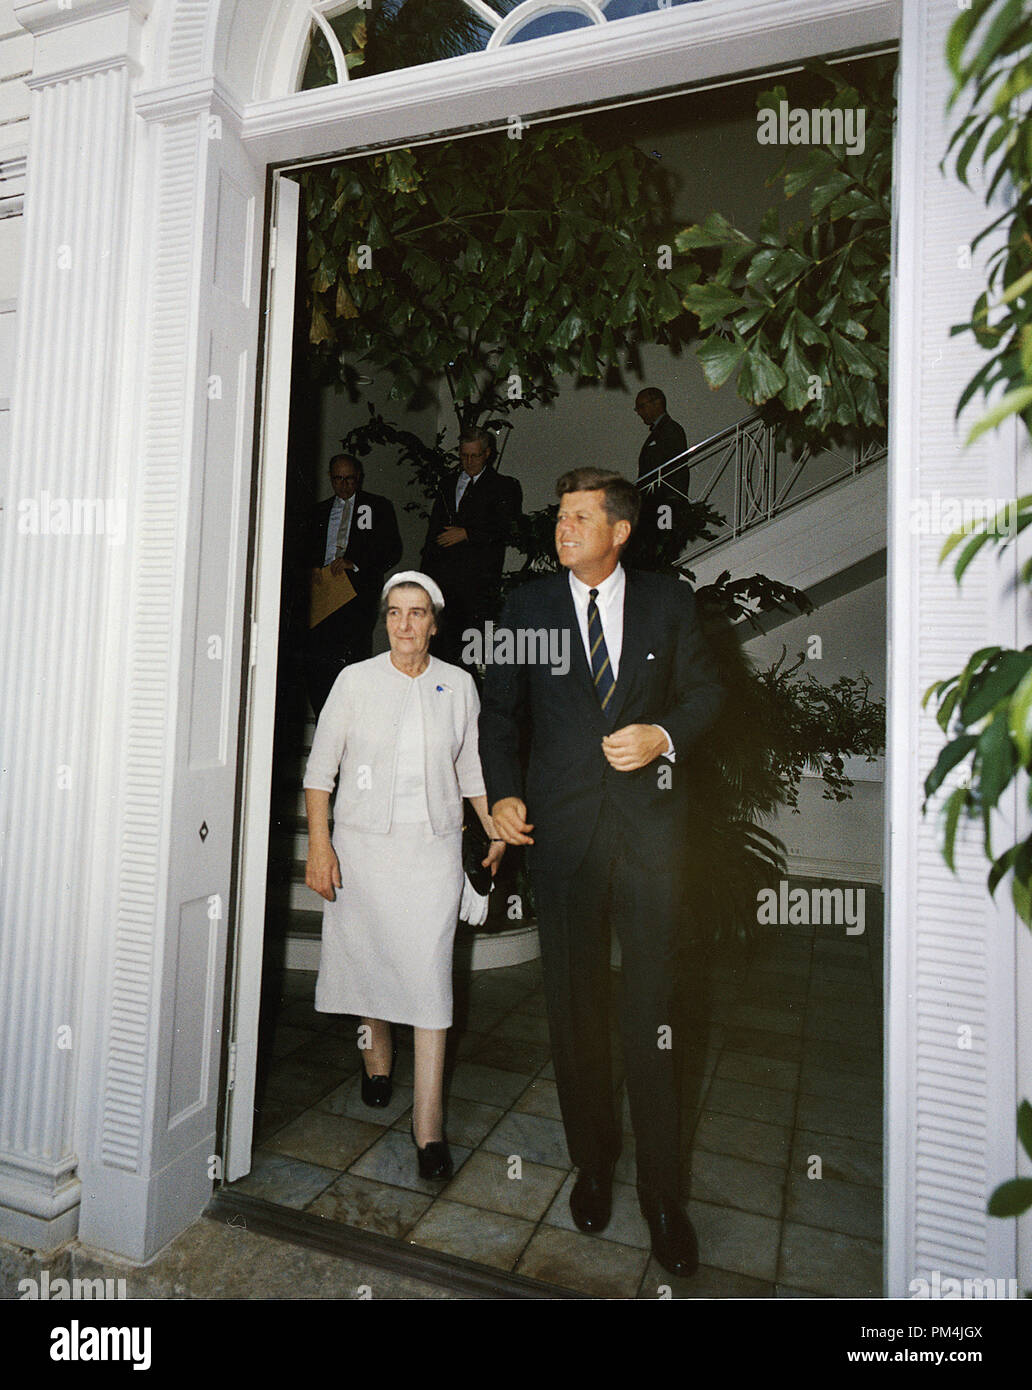 President John F. Kennedy meets with Foreign Minister of Israel Golda Meir December 27th, 1962. Photo by Cecil Stoughton / NARA   File Reference # 1003 761THA Stock Photo